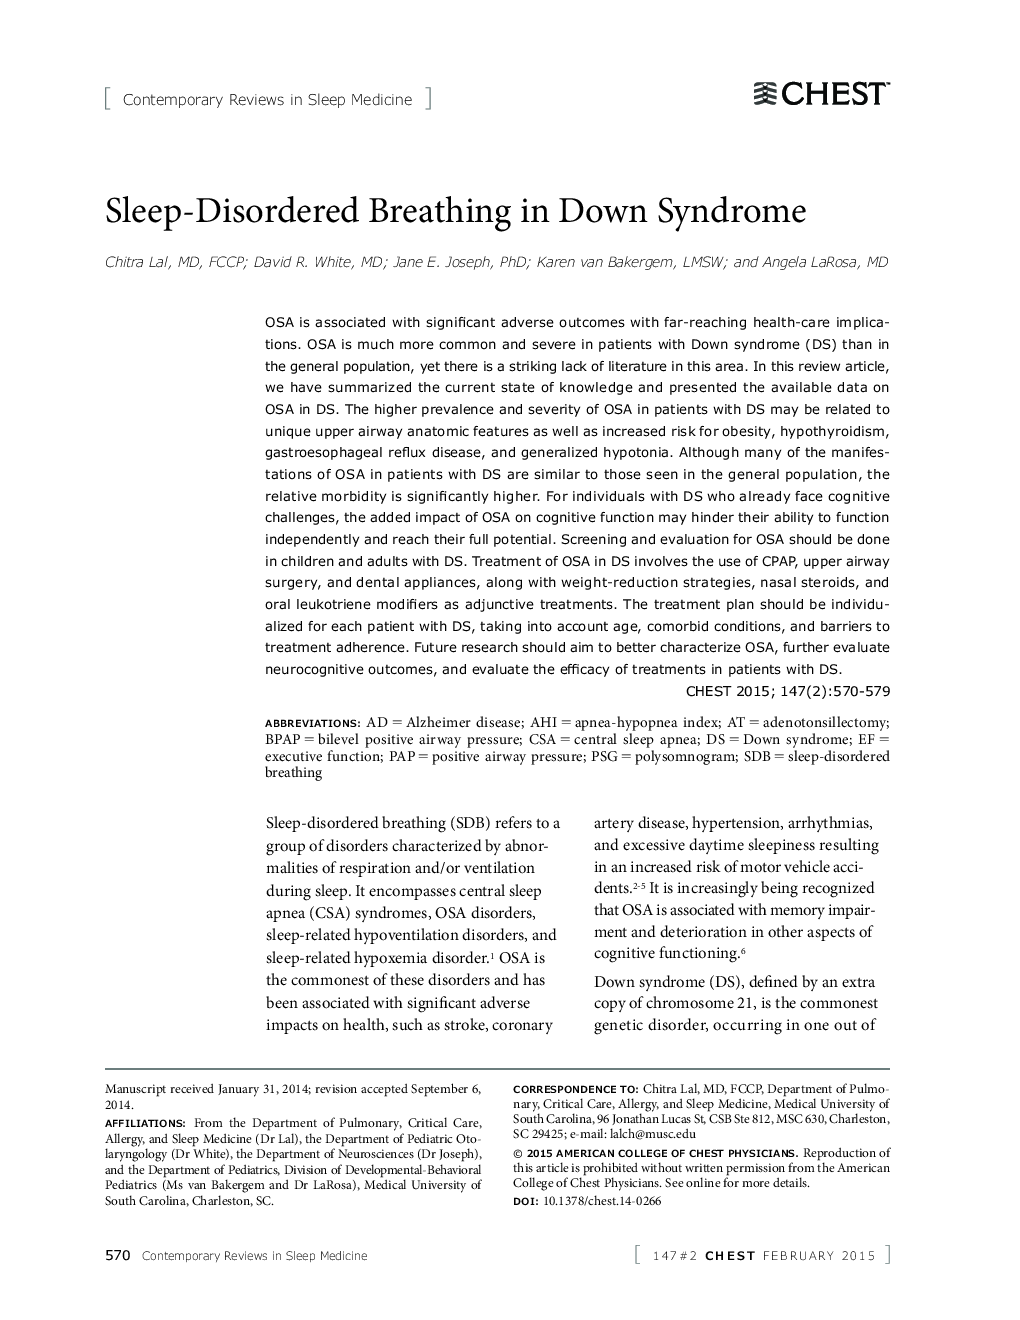 Sleep-Disordered Breathing in Down Syndrome